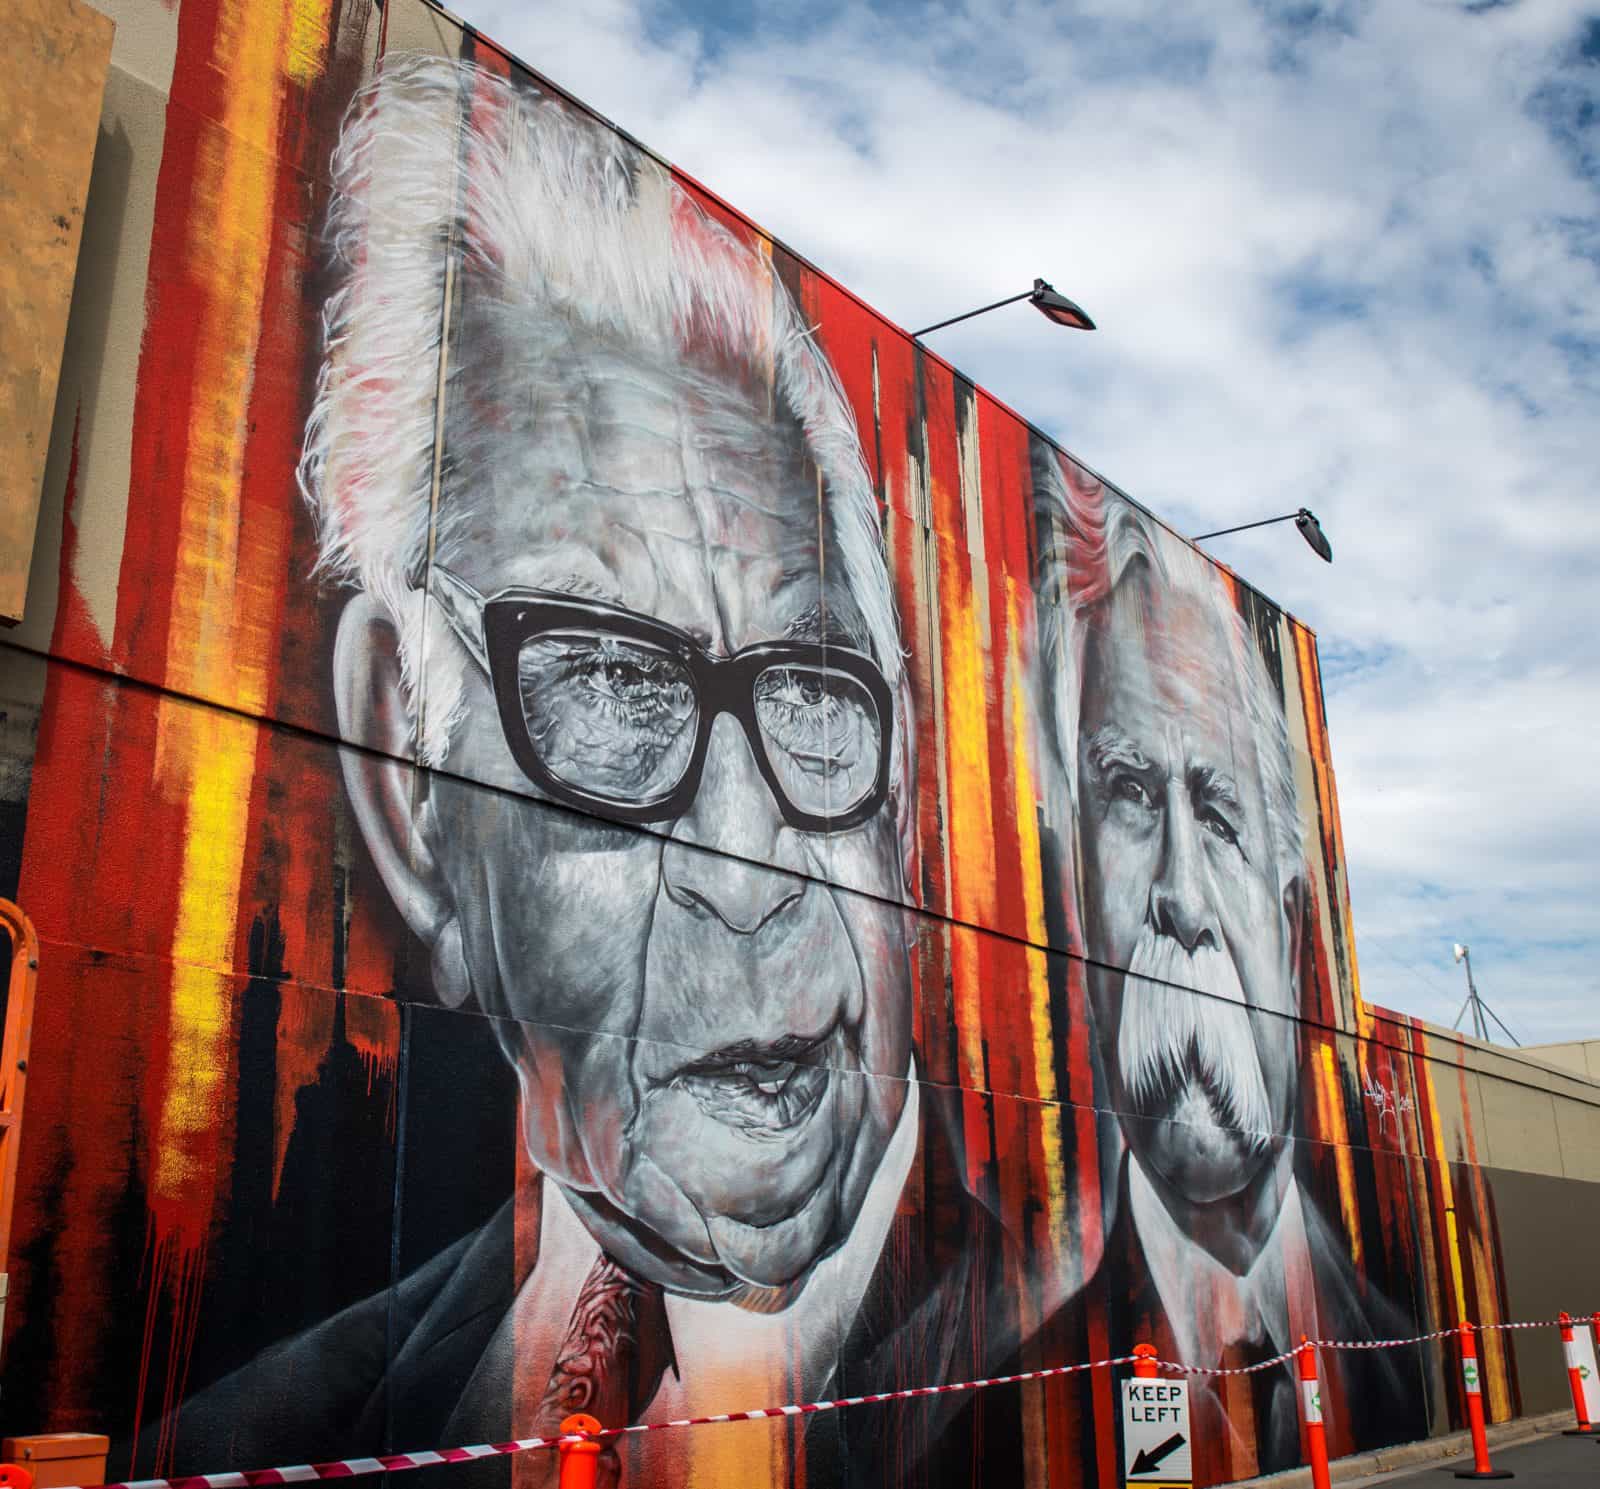 The mural, painted by well known artist Adnate depicts the late William Cooper and the late Pastor S